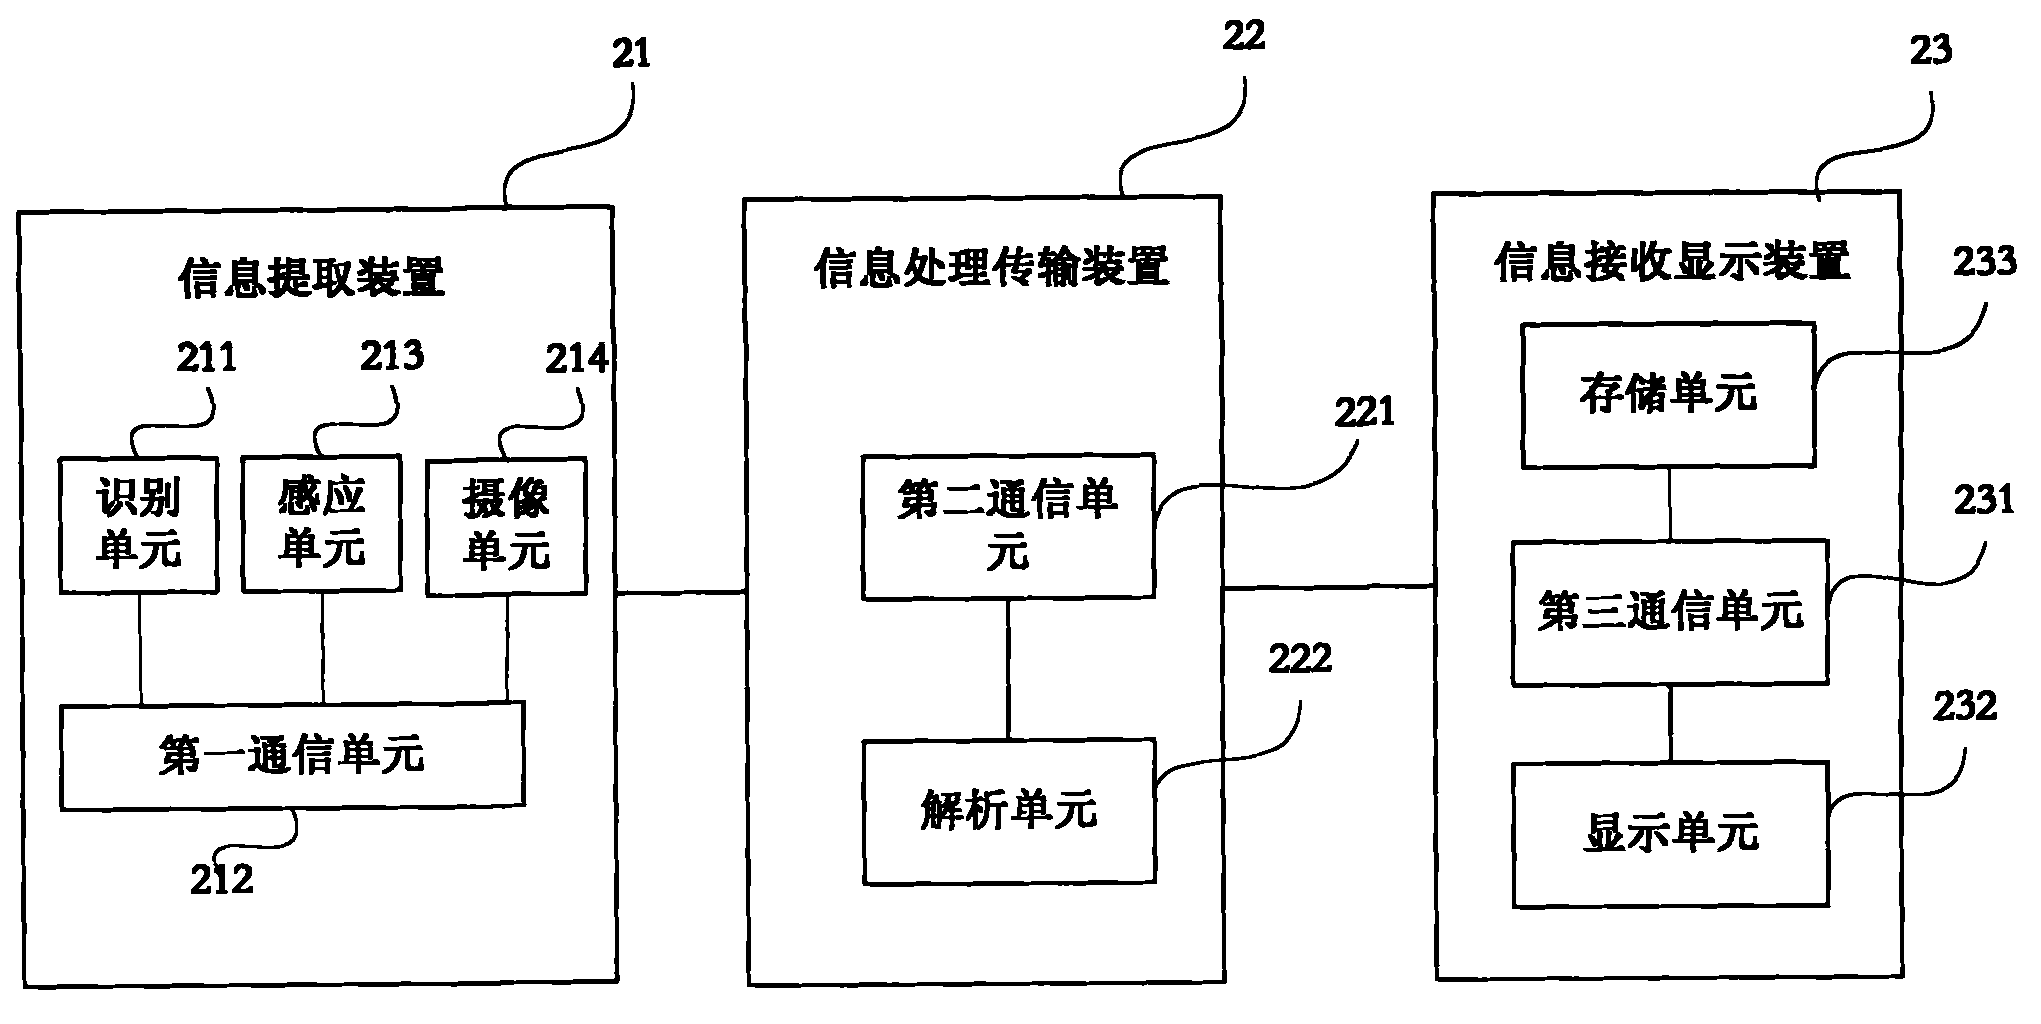 Agricultural production activity information tracing system